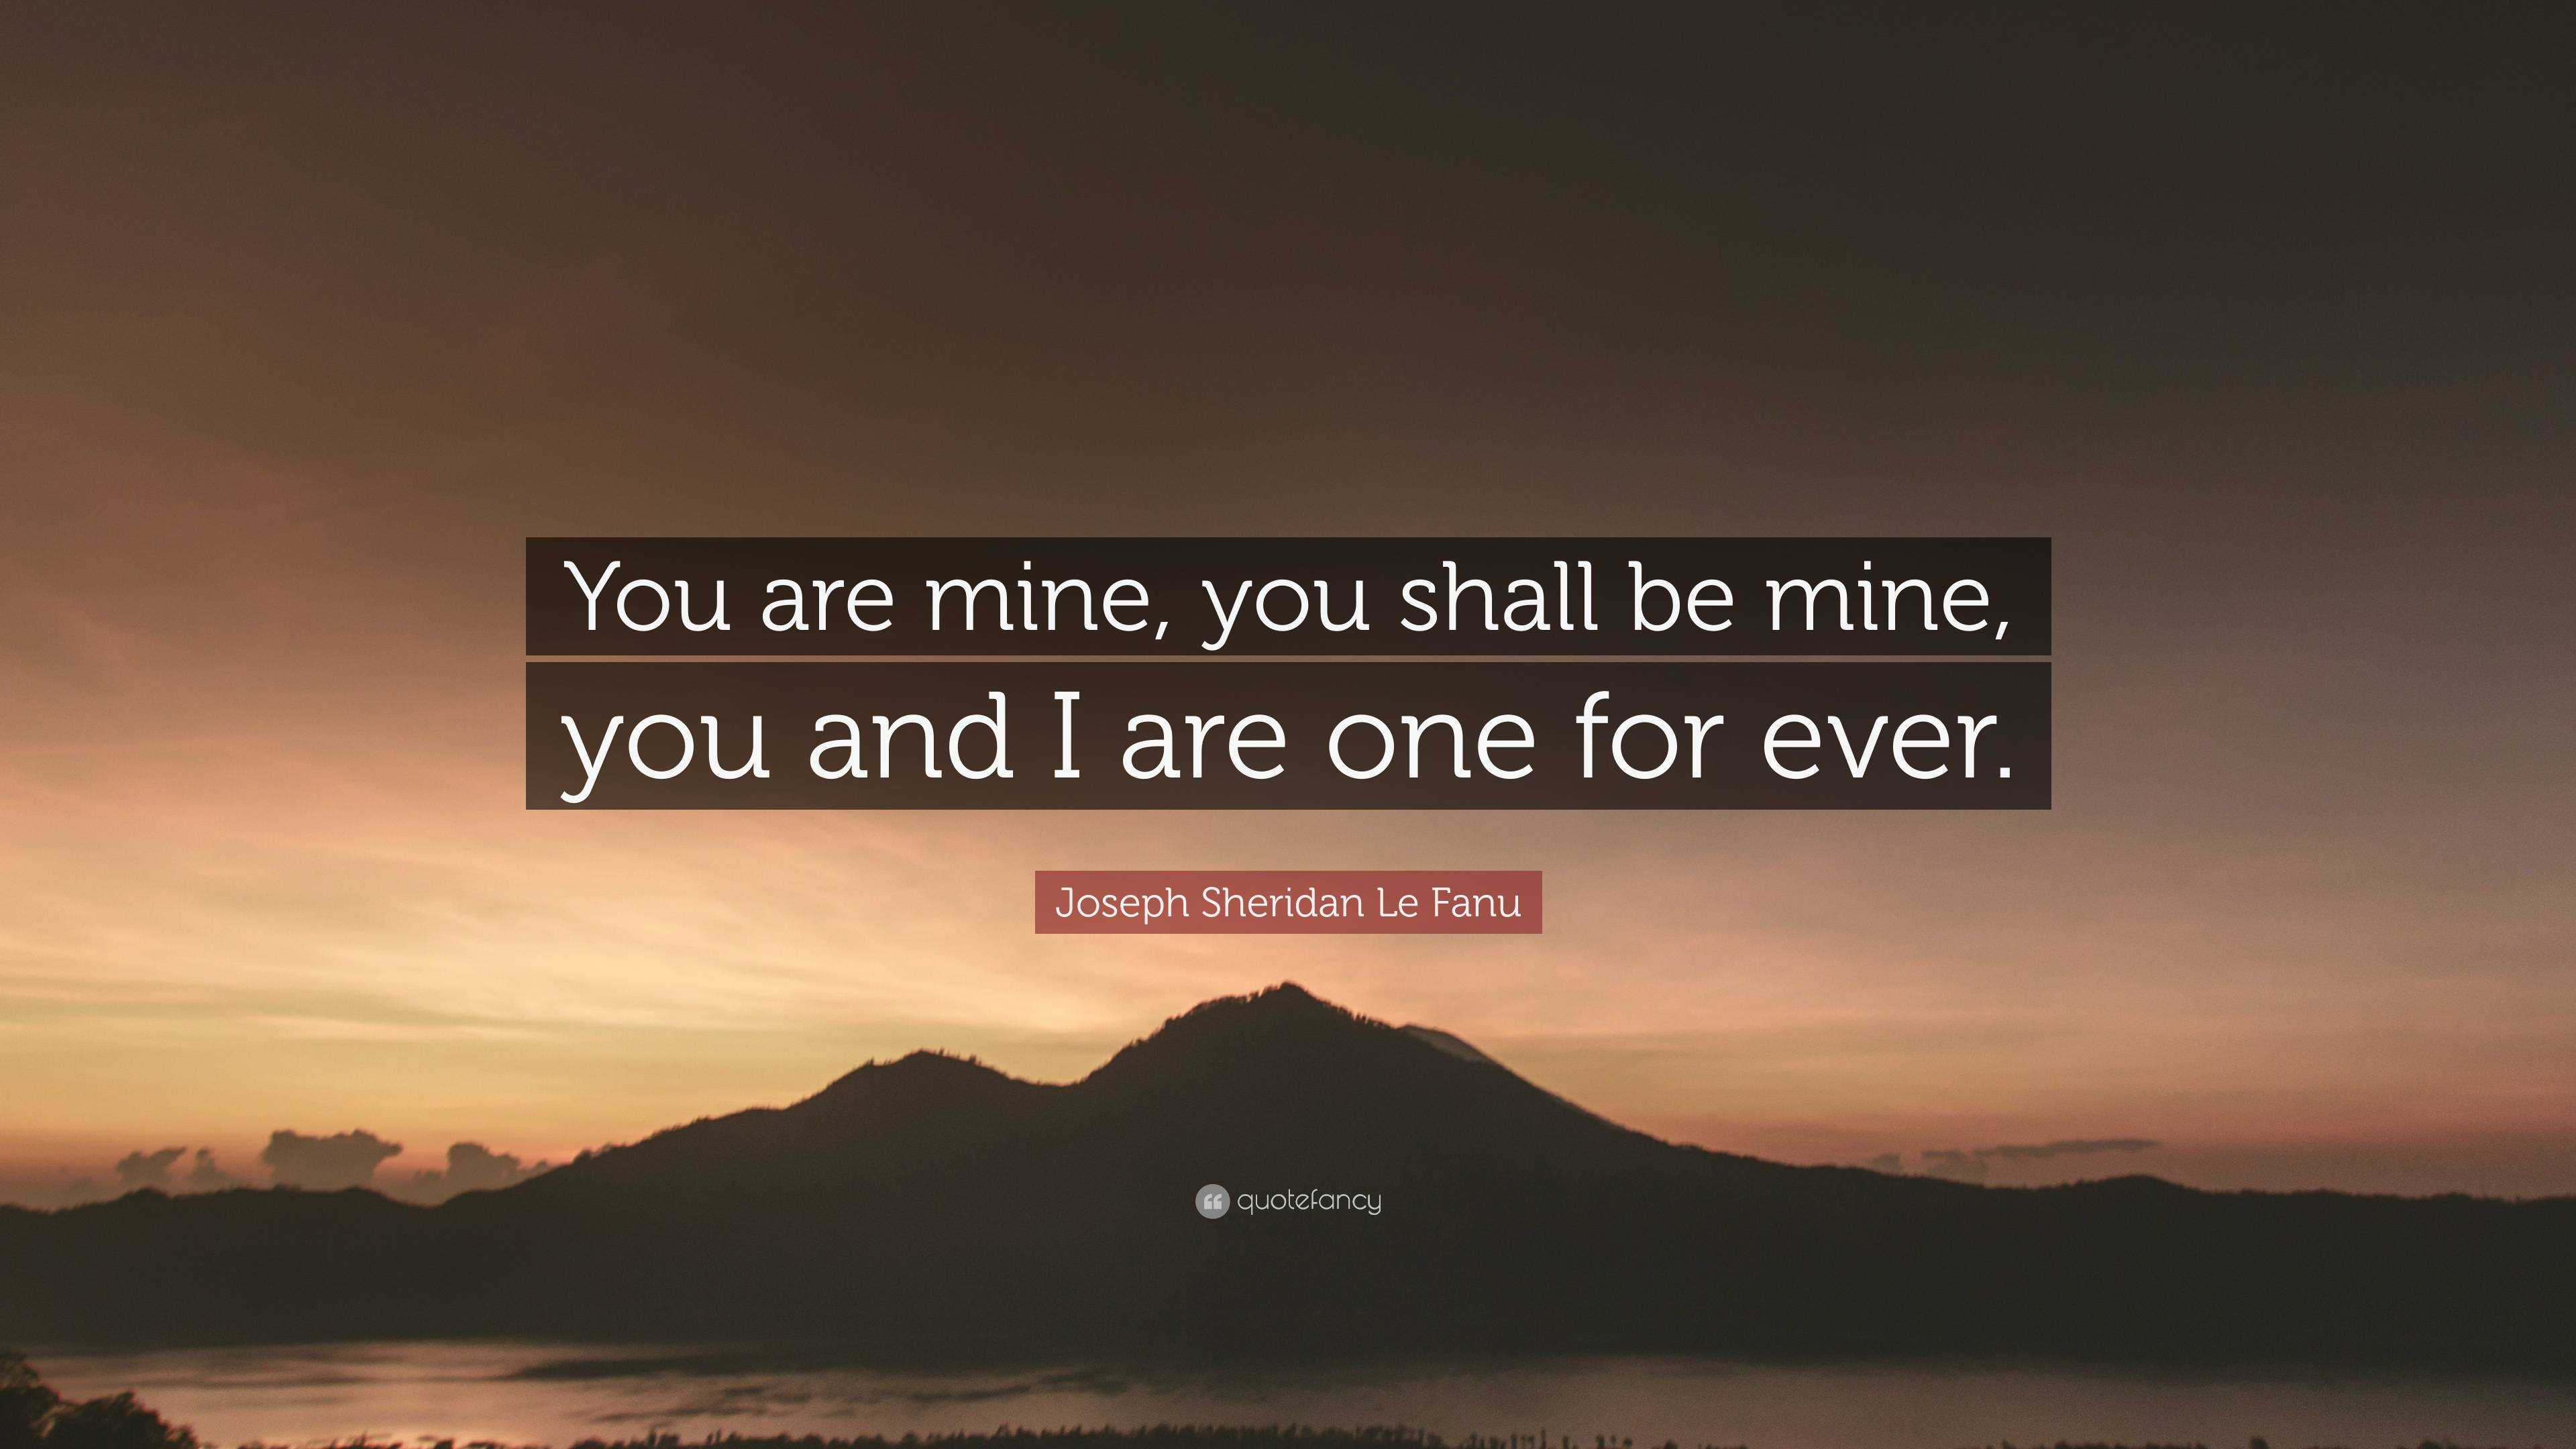 Joseph Sheridan Le Fanu Quote: “You are mine, you shall be mine, you ...